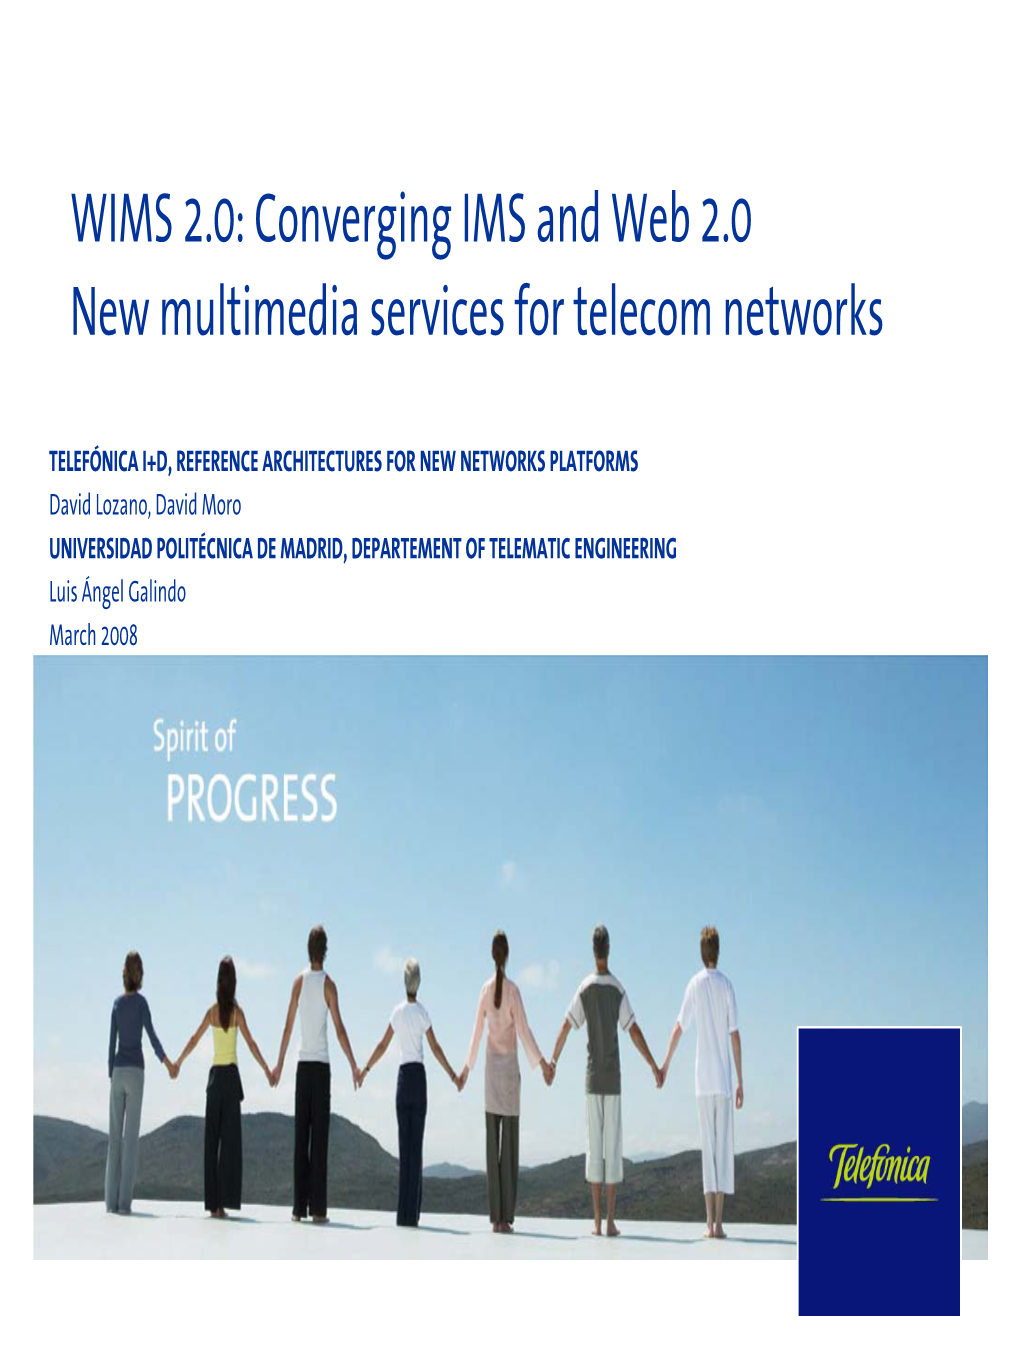 WIMS 2.0: Converging IMS and Web 2.0 New Multimedia Services for Telecom Networks